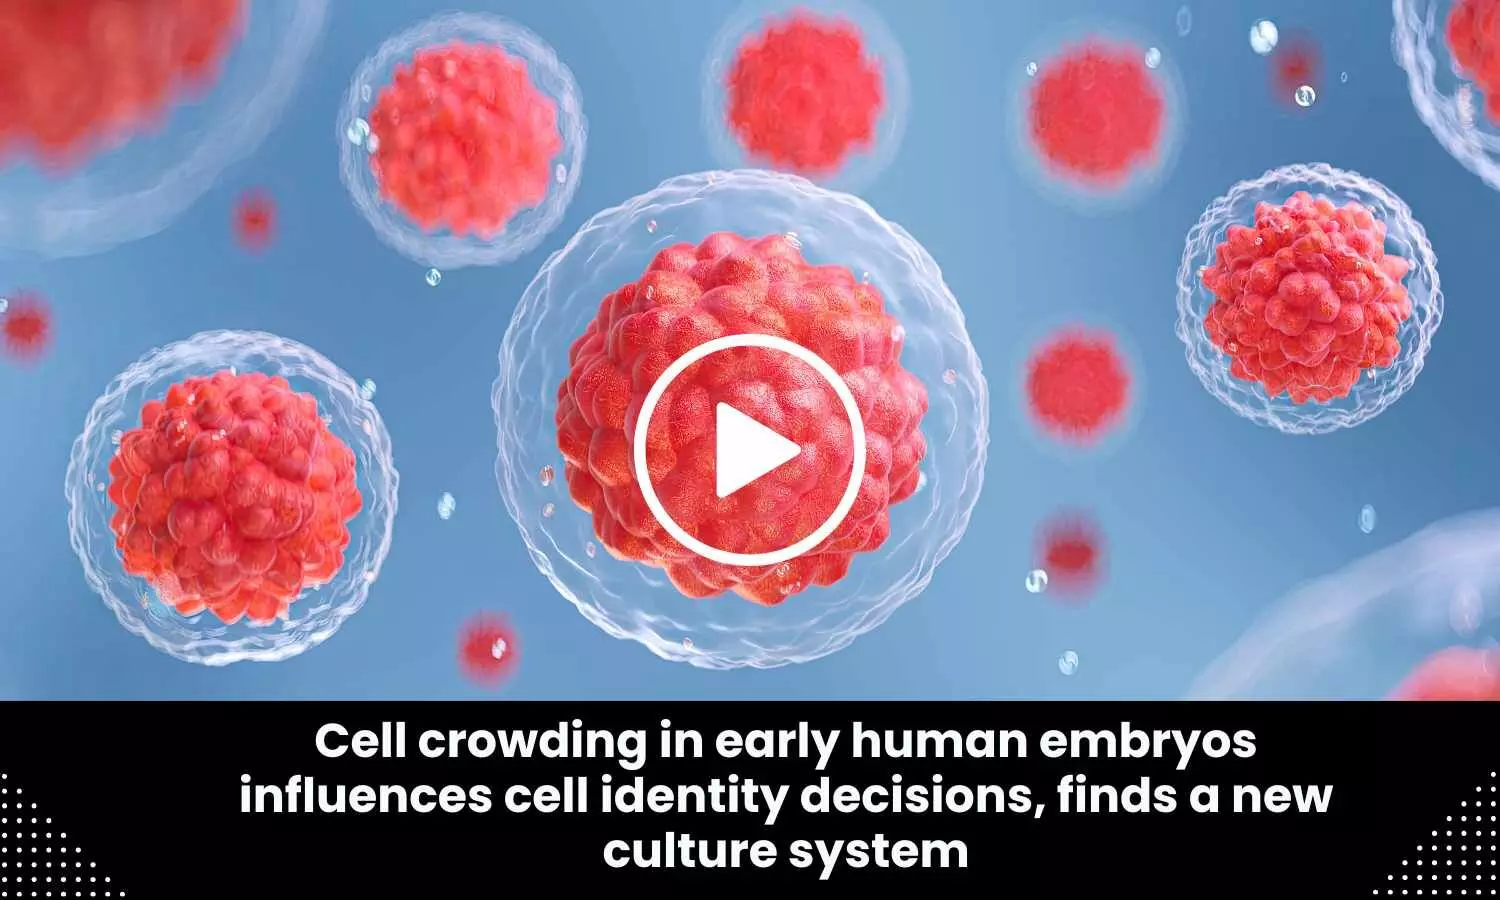 Cell crowding in early human embryos influences cell identity decisions, finds a new culture system